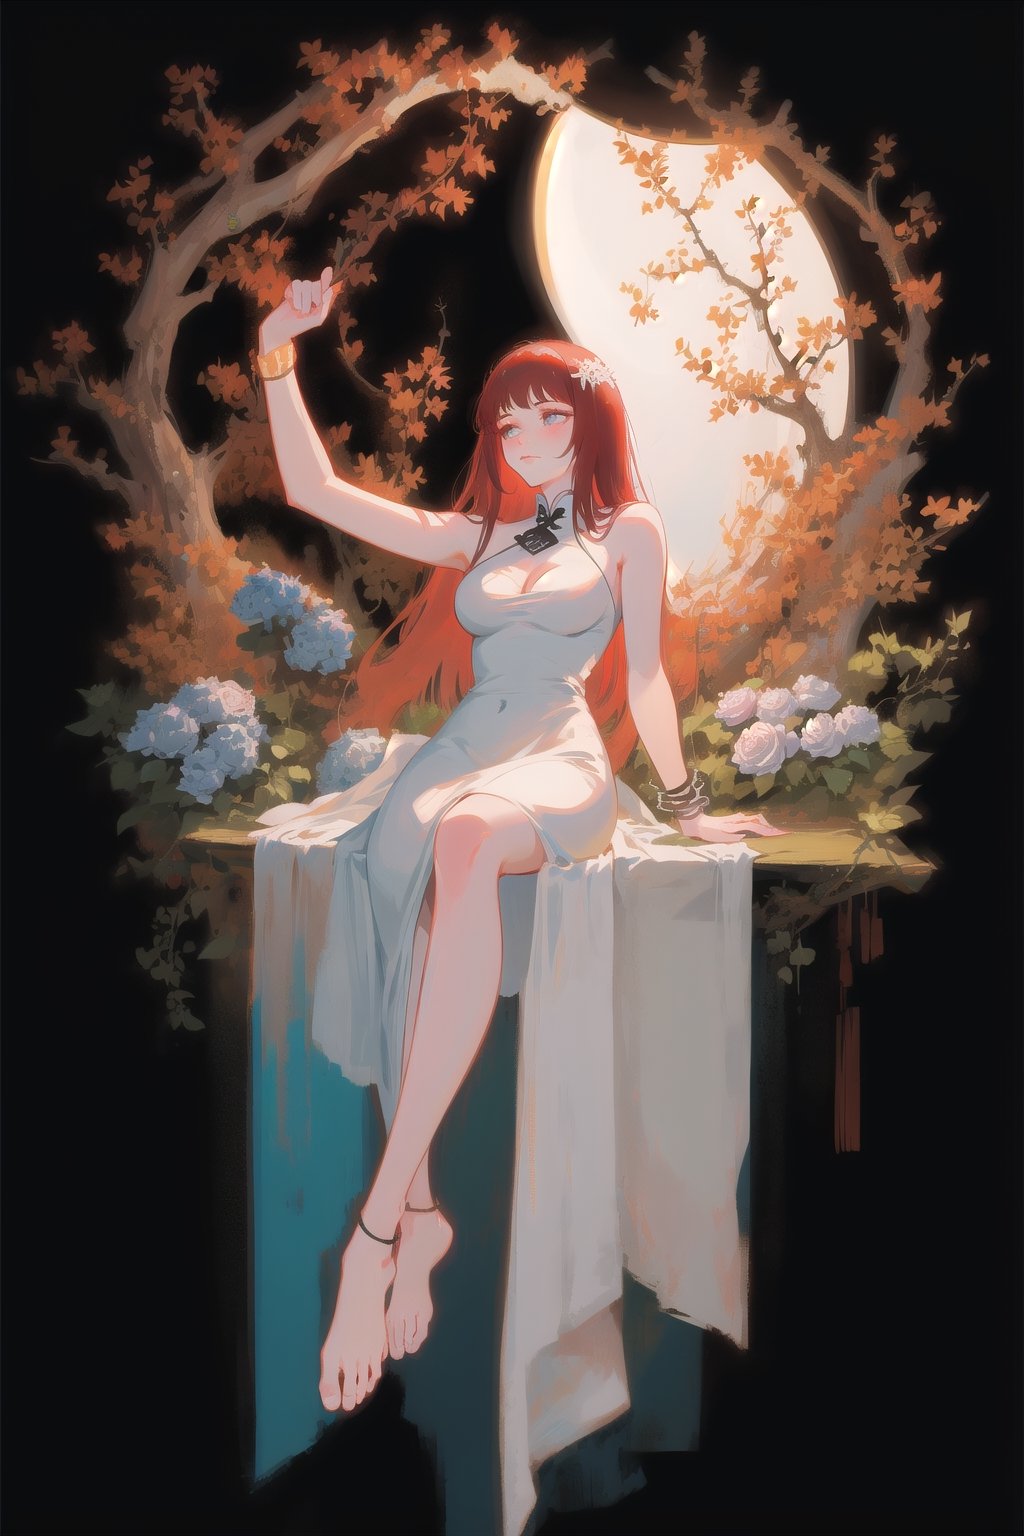 Goddess, red hair, white chinese dress, gradient background, large breasts, 1girl, solo, best quality, masterpiece, black background, full body, tarot_style, heavenly, aura, godess, detailed dress, motif, intricate dress design, chinese, simple white dress, sleeveless chinese dress, barefoot, black foot bracelet, simple background, sitting in heaven, vines, roses, leaves, tree, mature, calm, serenity, empress, goddess being worshipped, resting, extremely beautiful, beauty, vibrant red hair, glowing,